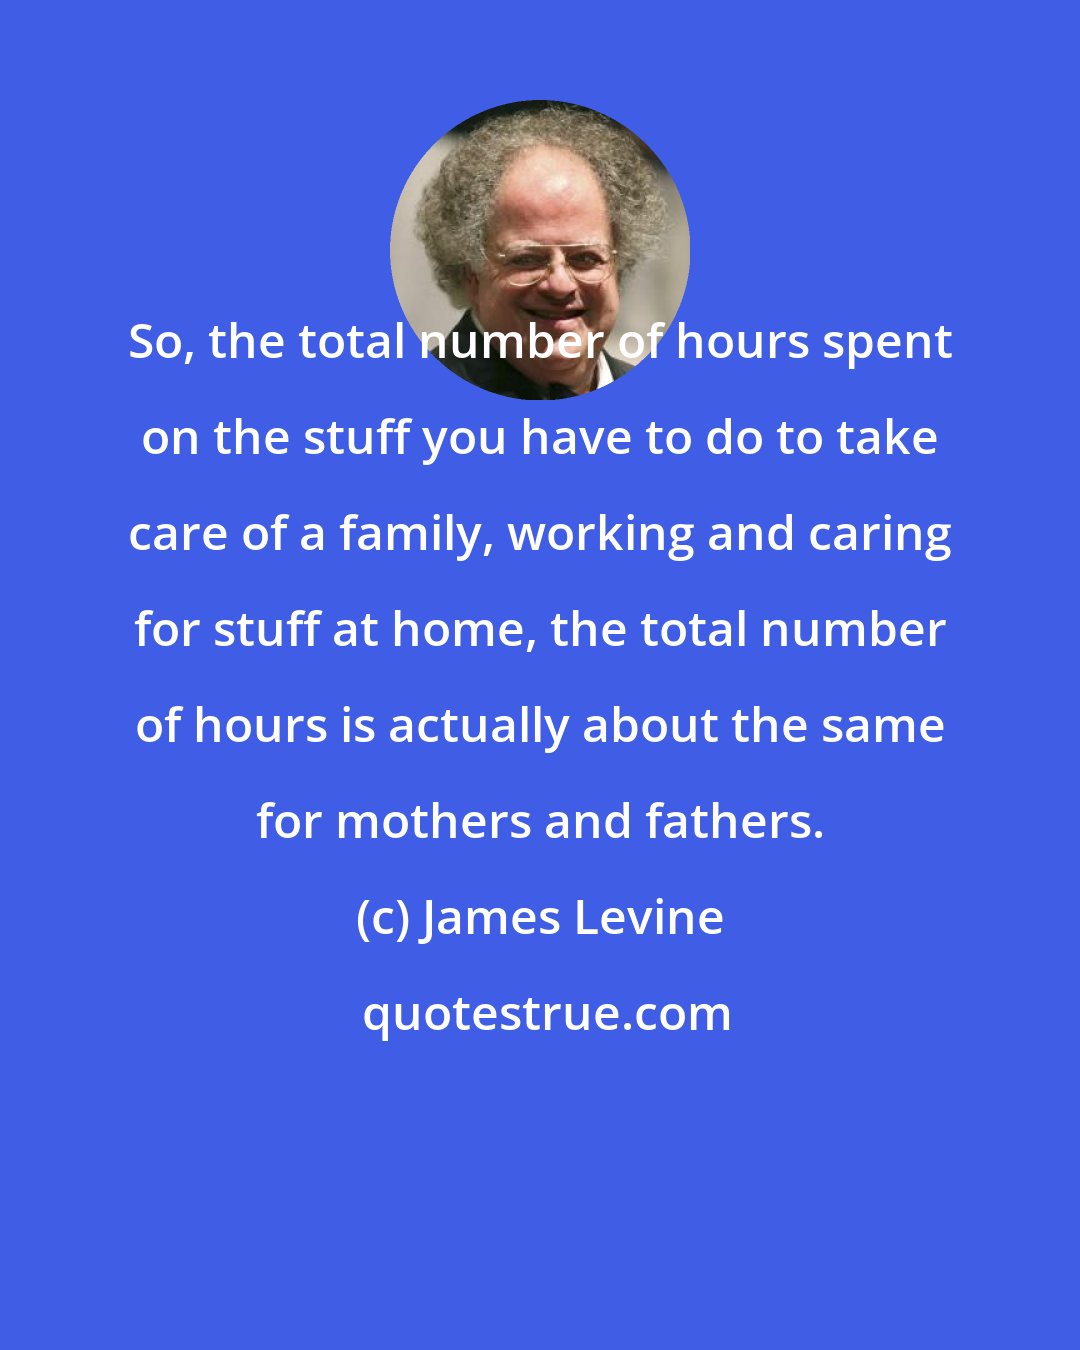 James Levine: So, the total number of hours spent on the stuff you have to do to take care of a family, working and caring for stuff at home, the total number of hours is actually about the same for mothers and fathers.